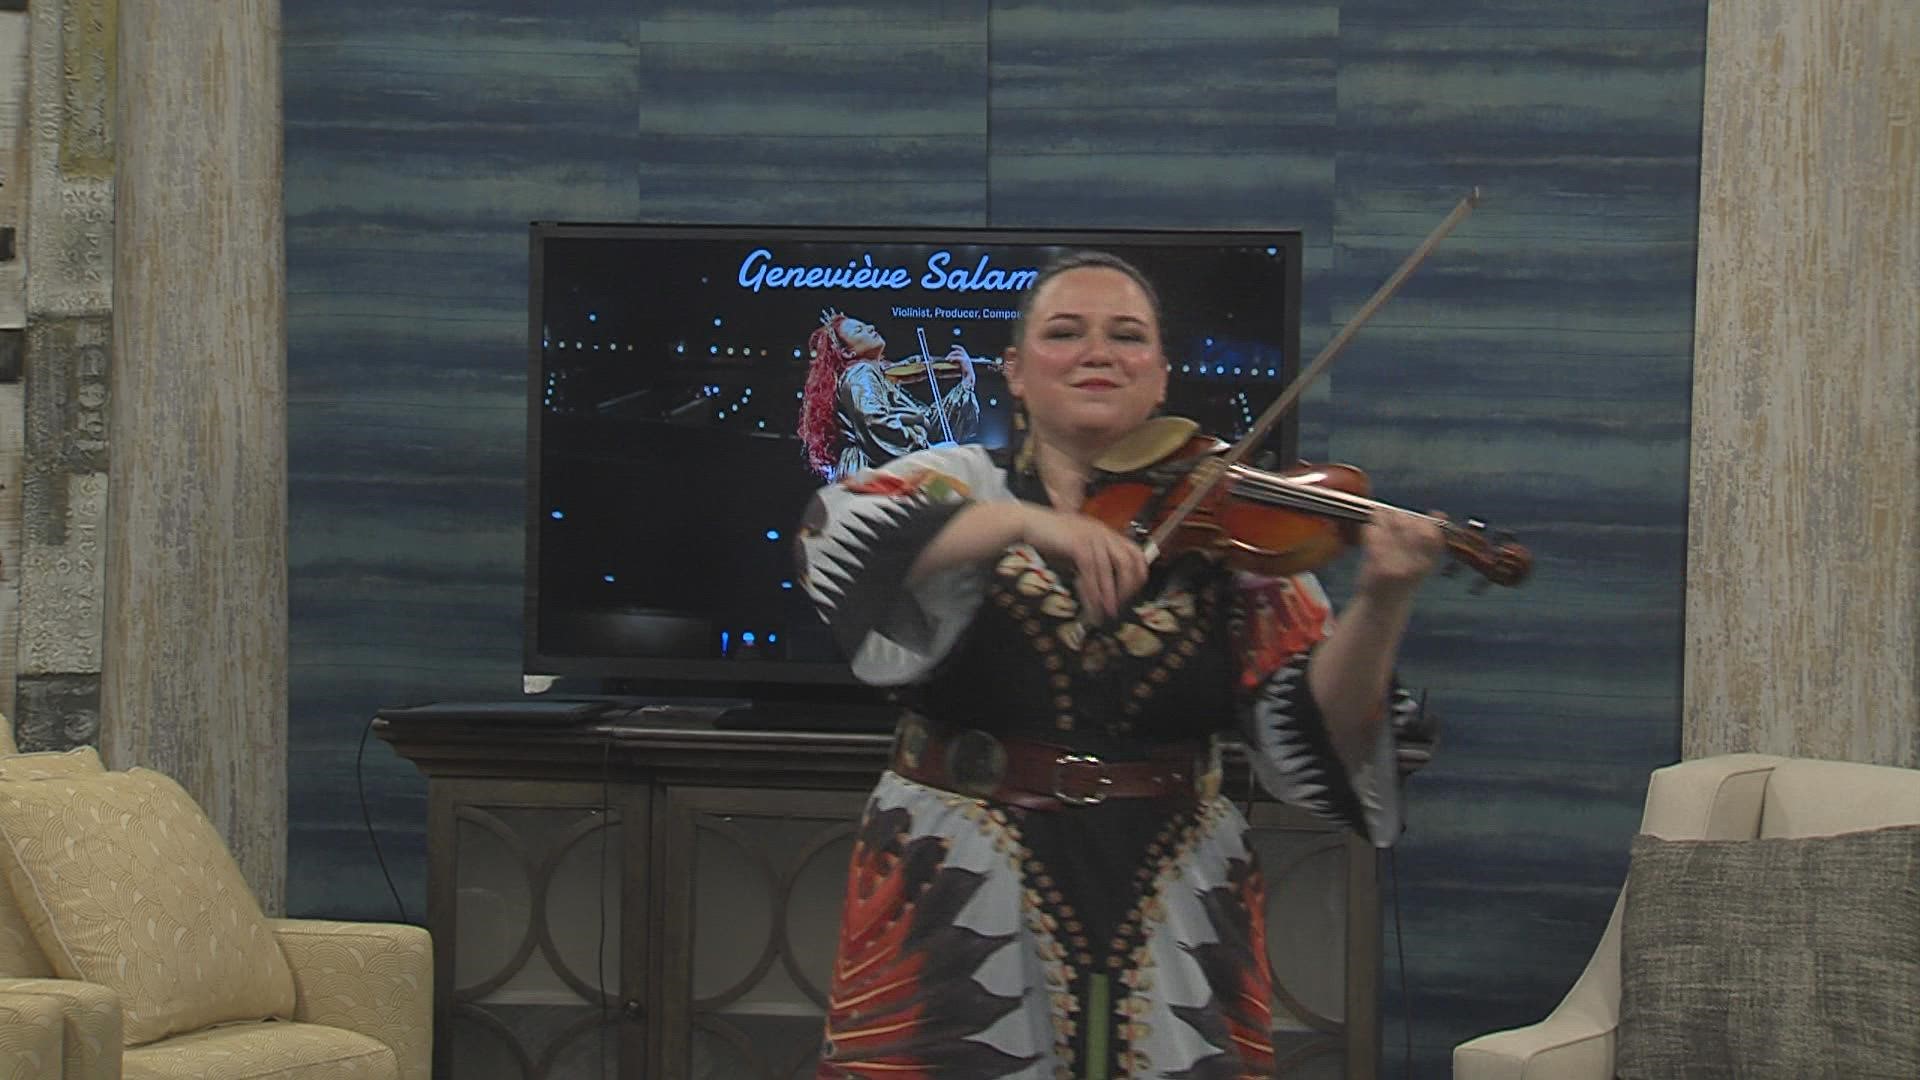 Our first IN STUDIO musical guest since the pandemic, Genevieve Salamone, The One Woman Symphony, talks about her upcoming concert & performs Anthem for the Dreamers